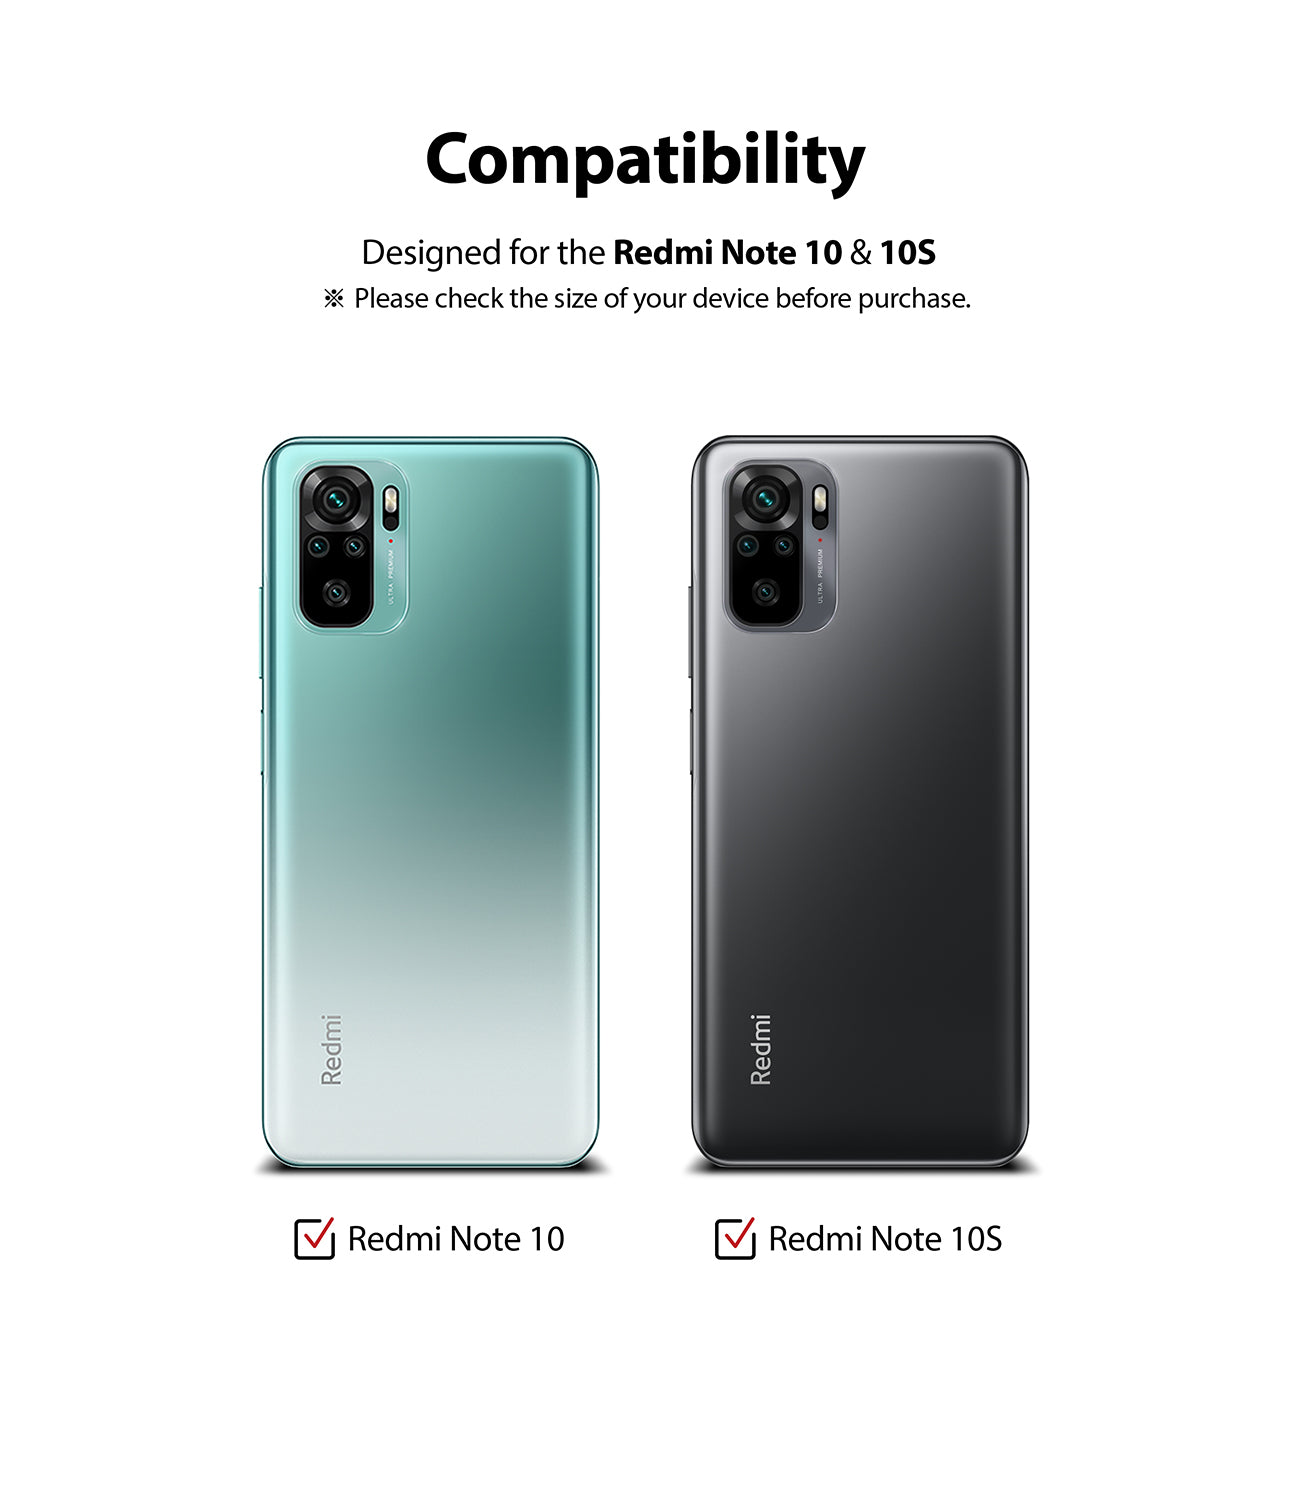 compatible with redmi not 10 / redmi note 10s